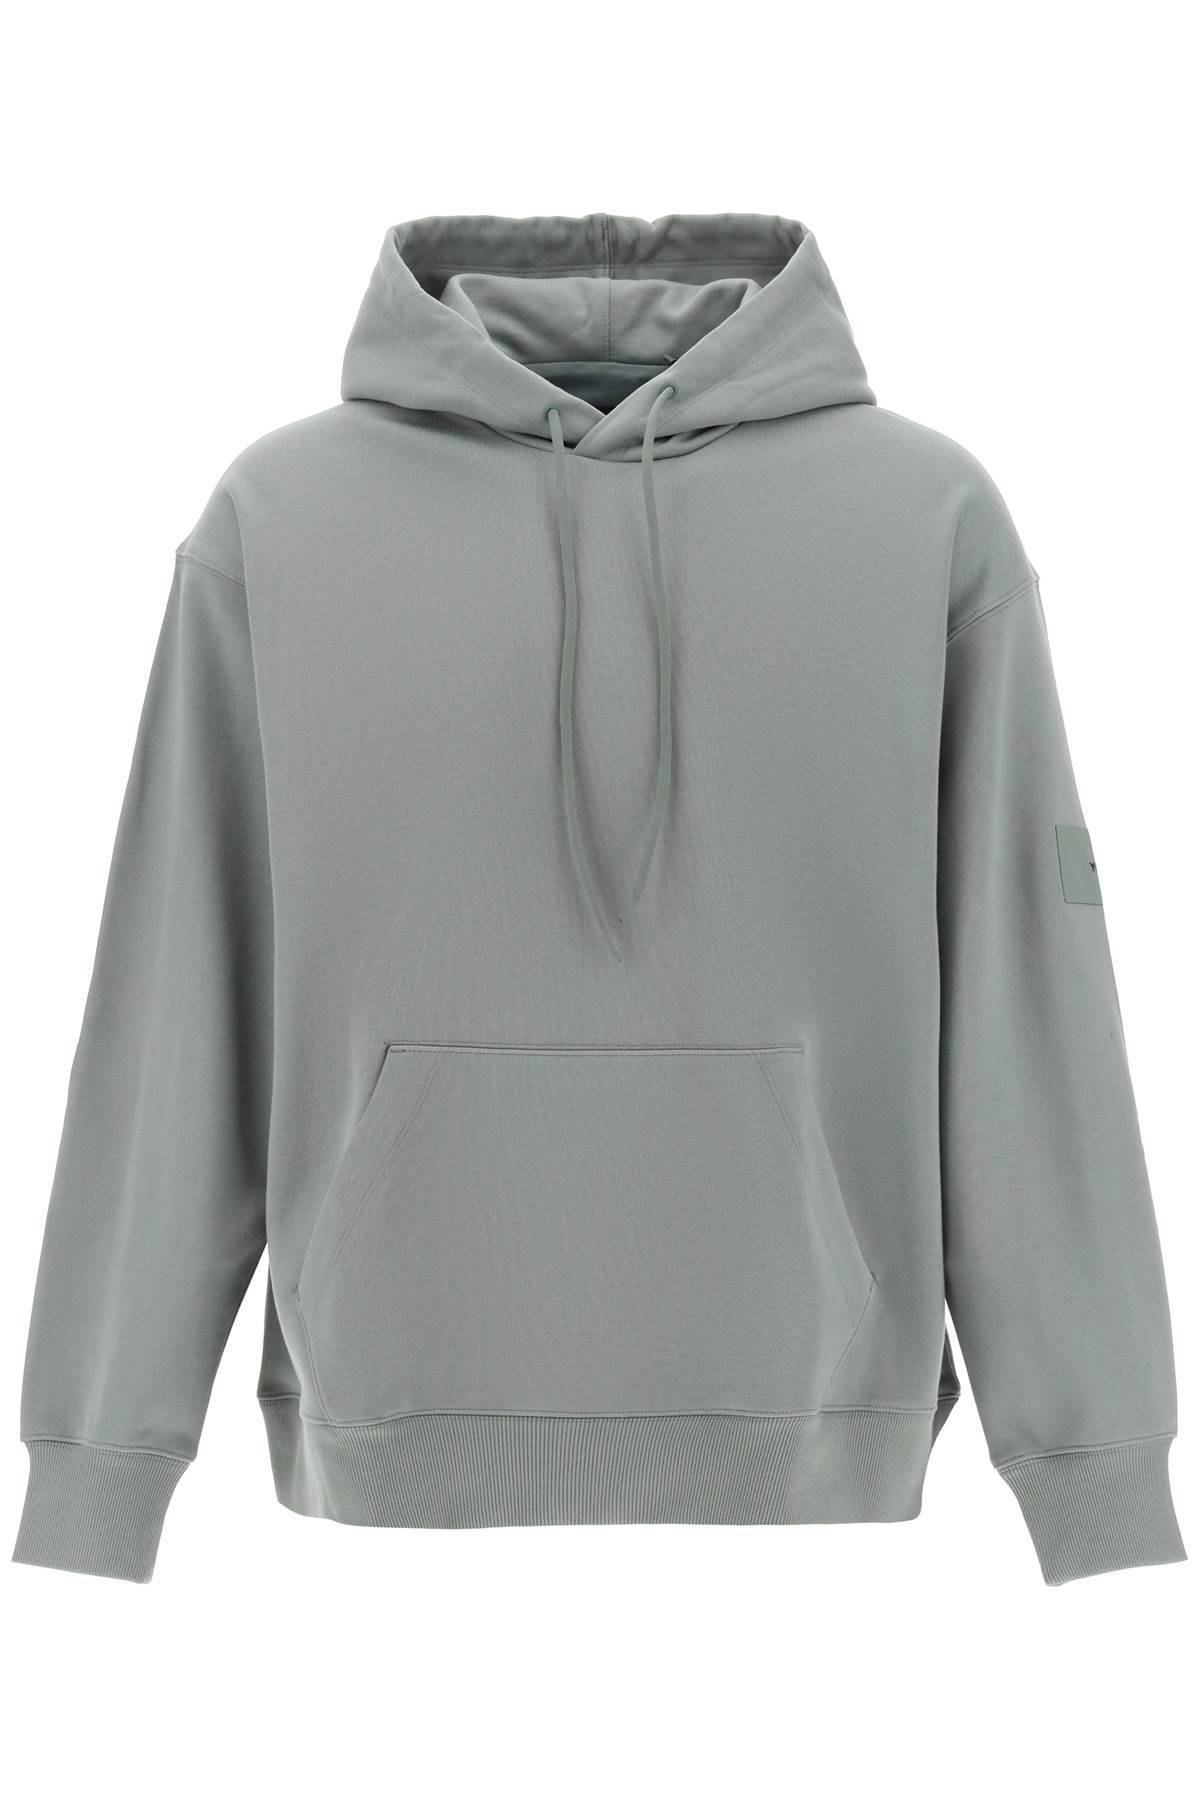 Y-3 Y-3 hoodie in cotton french terry